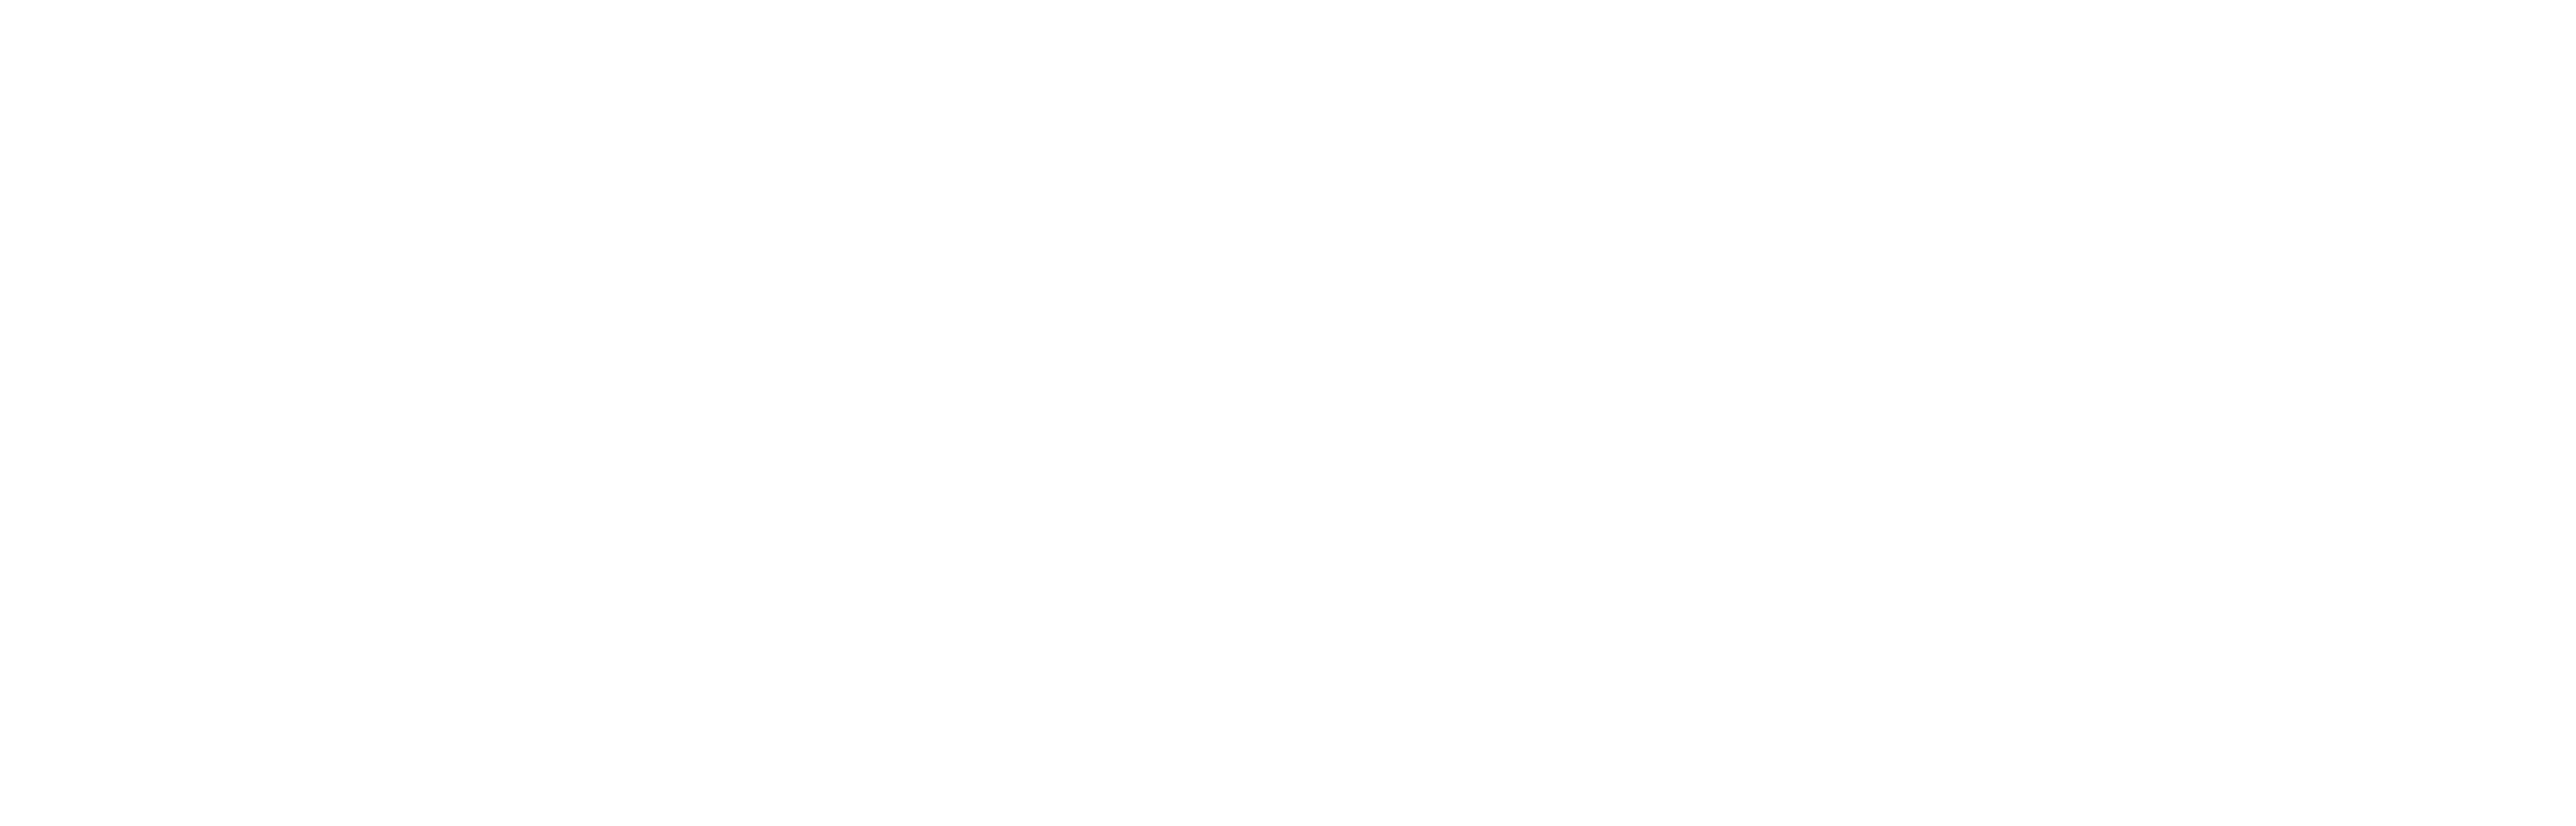 AI luminaries share expertise, original research and visions on AI for Good